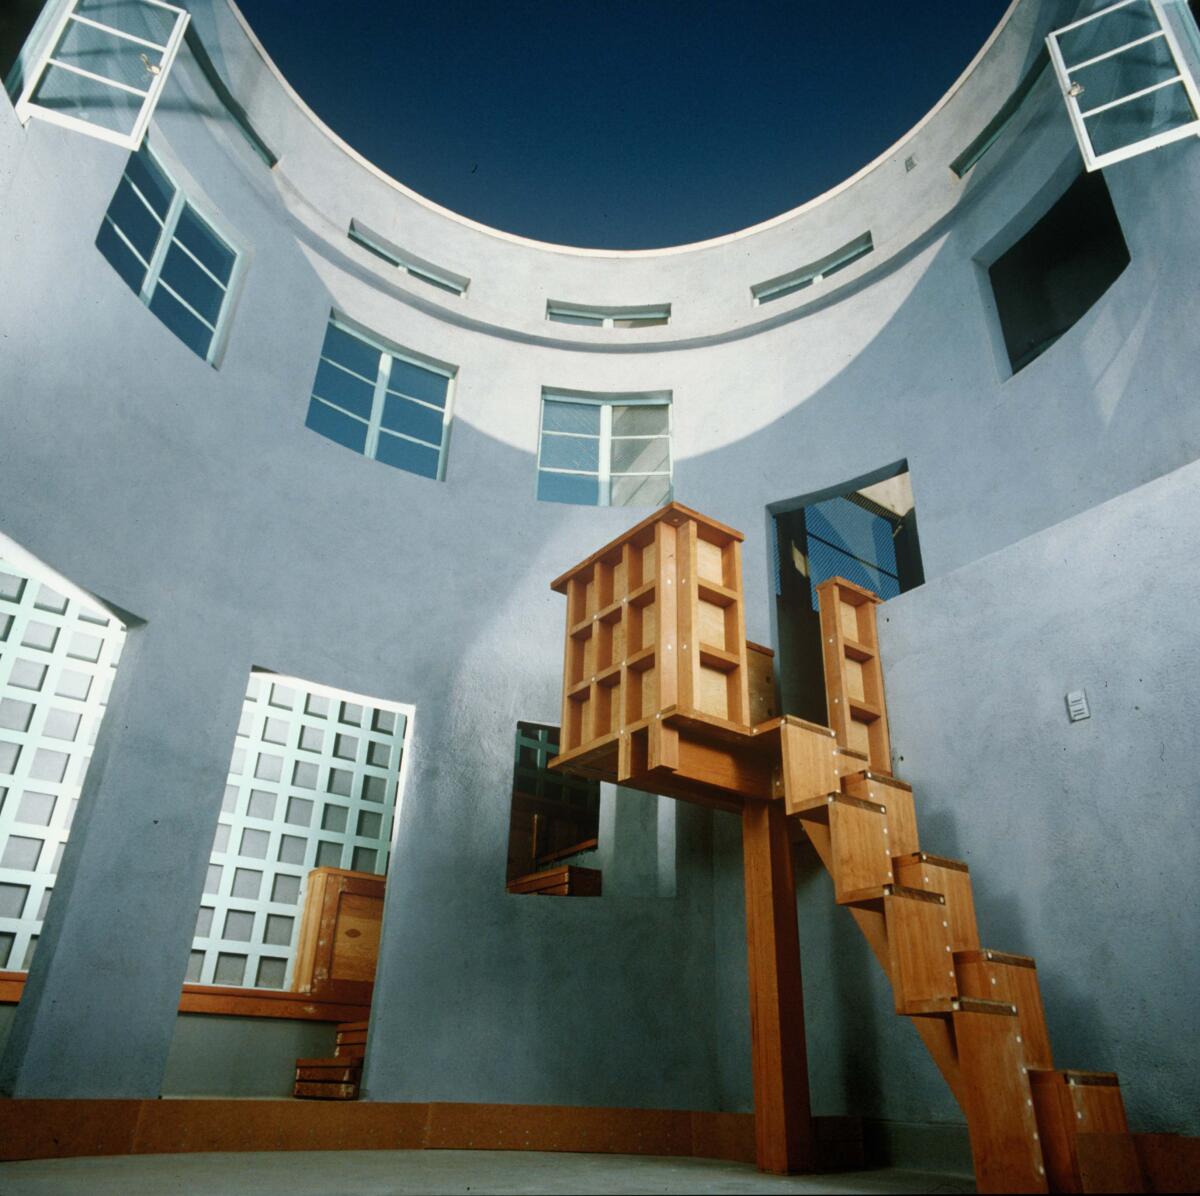 An upward view shows a rounded, Postmodern two-story courtyard painted blue with jagged wooden stairs